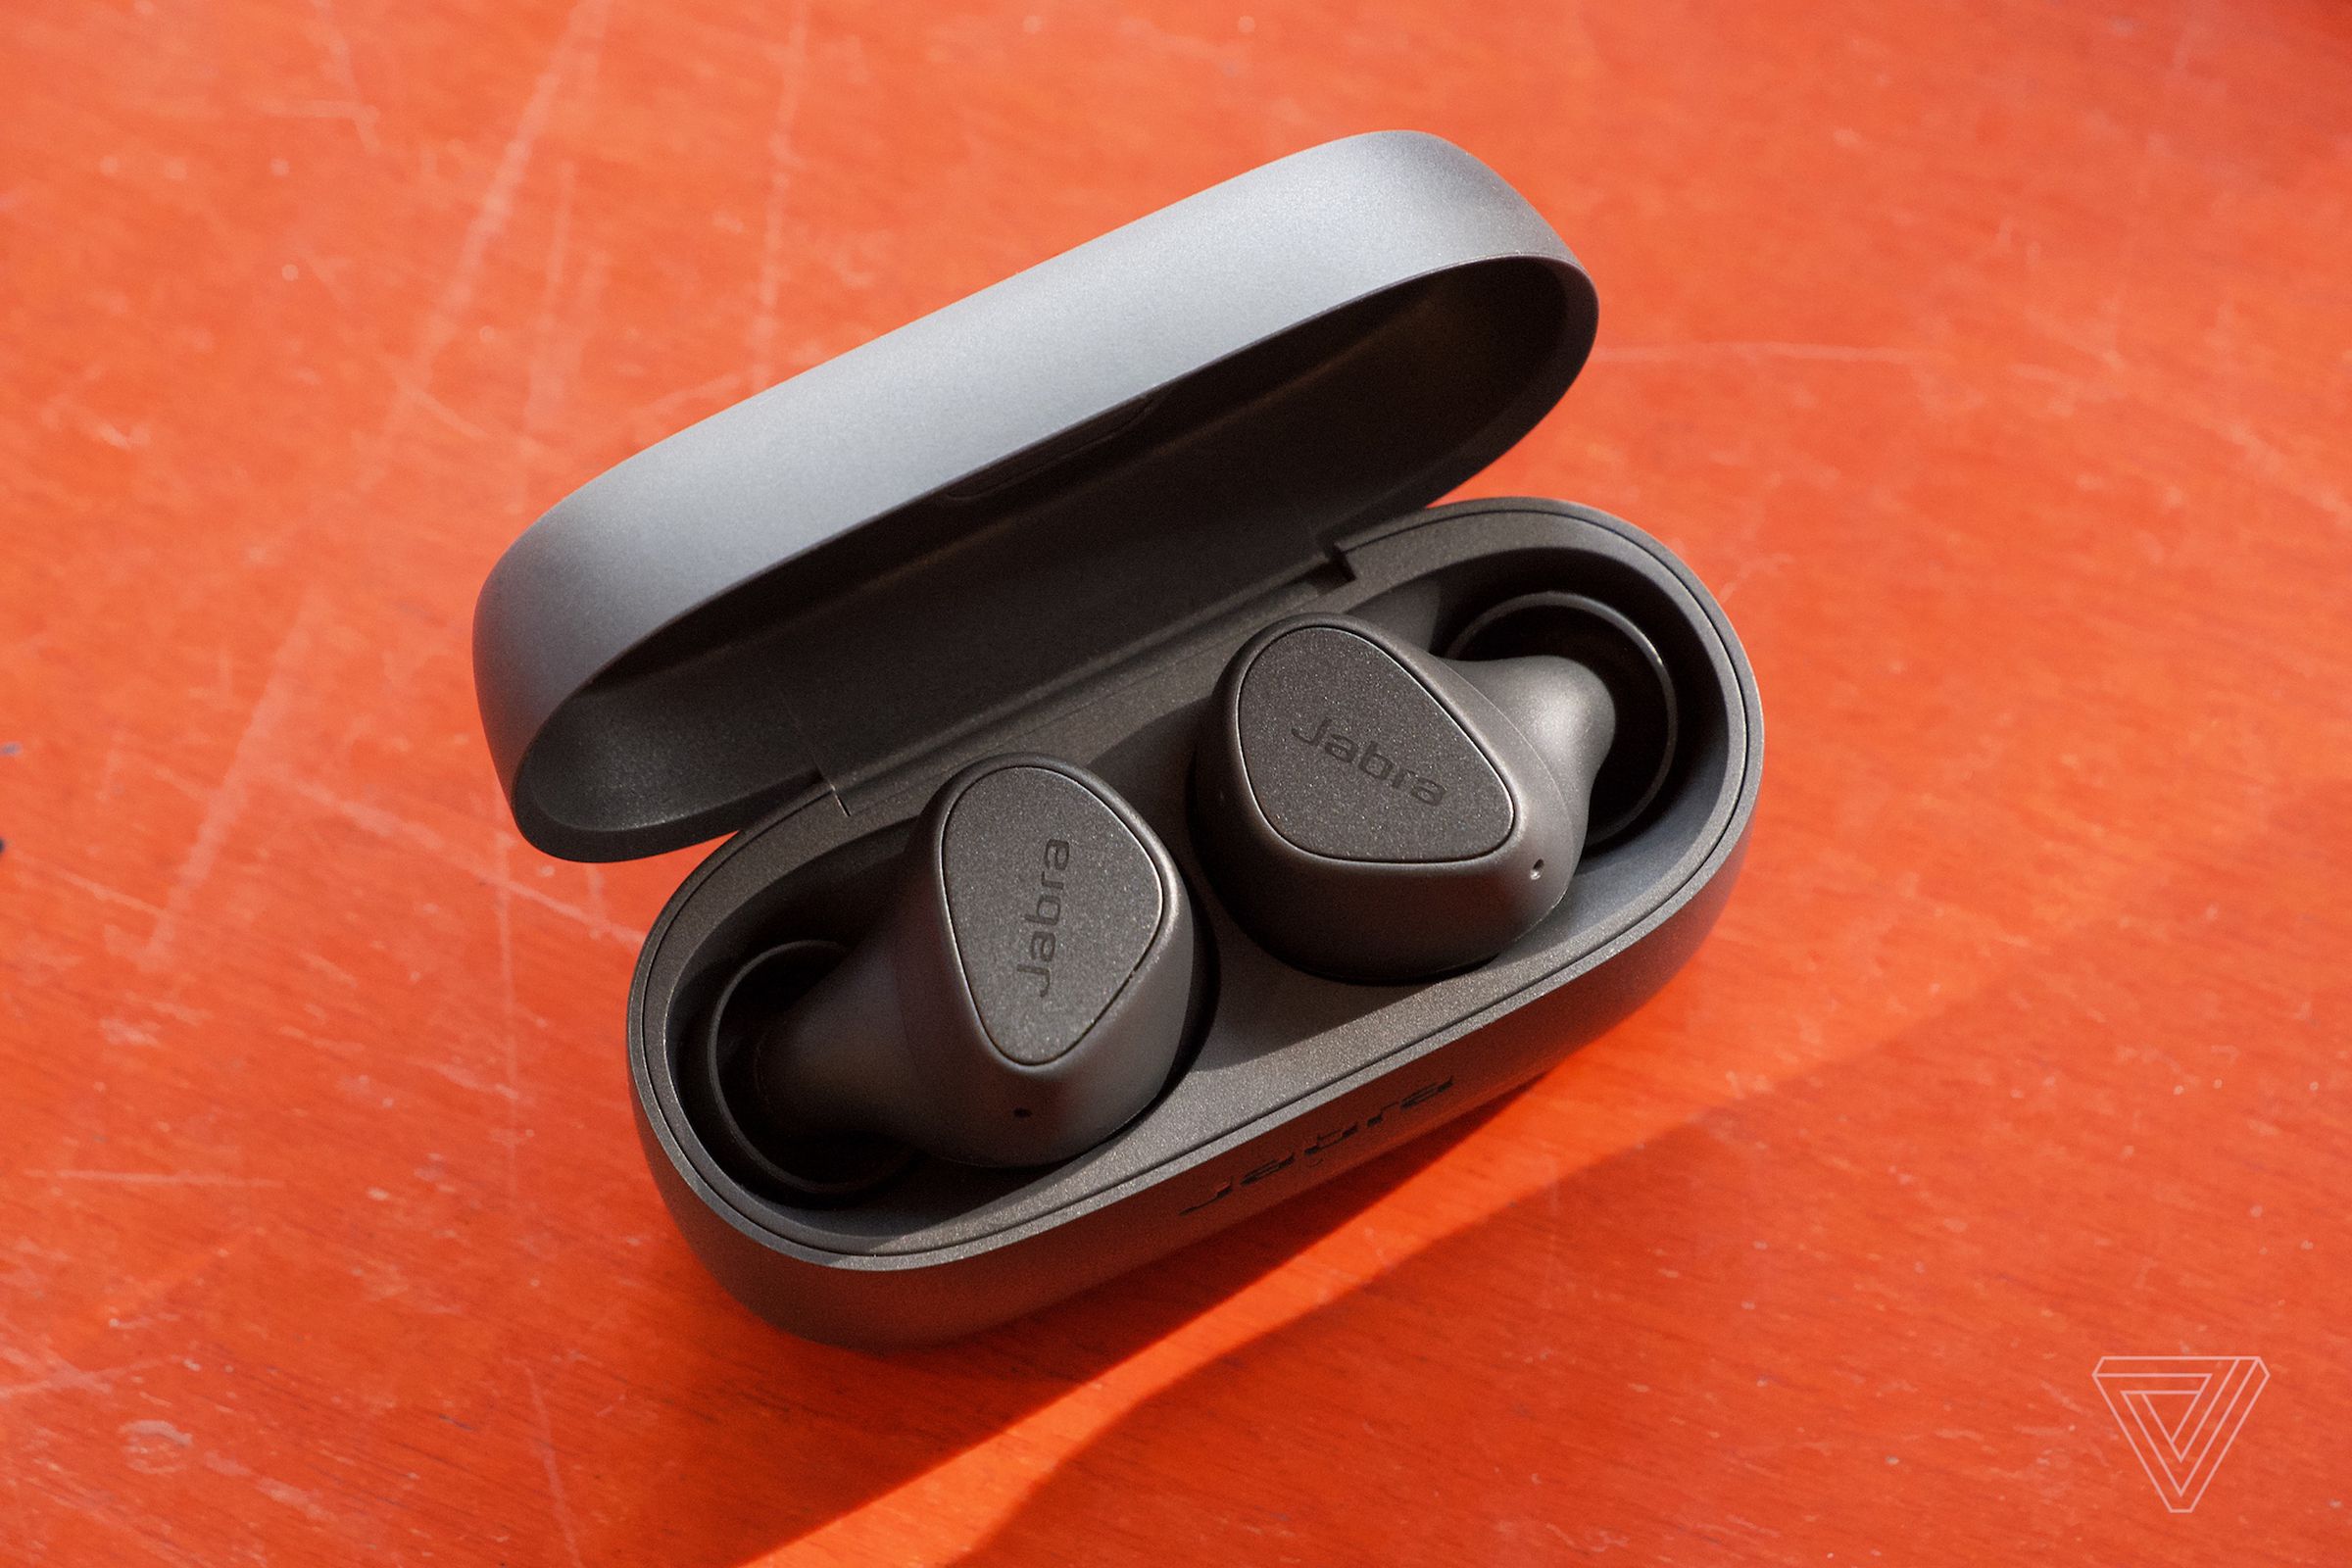 Jabra’s Elite 3 earbuds offer good sound quality and lengthy battery life.